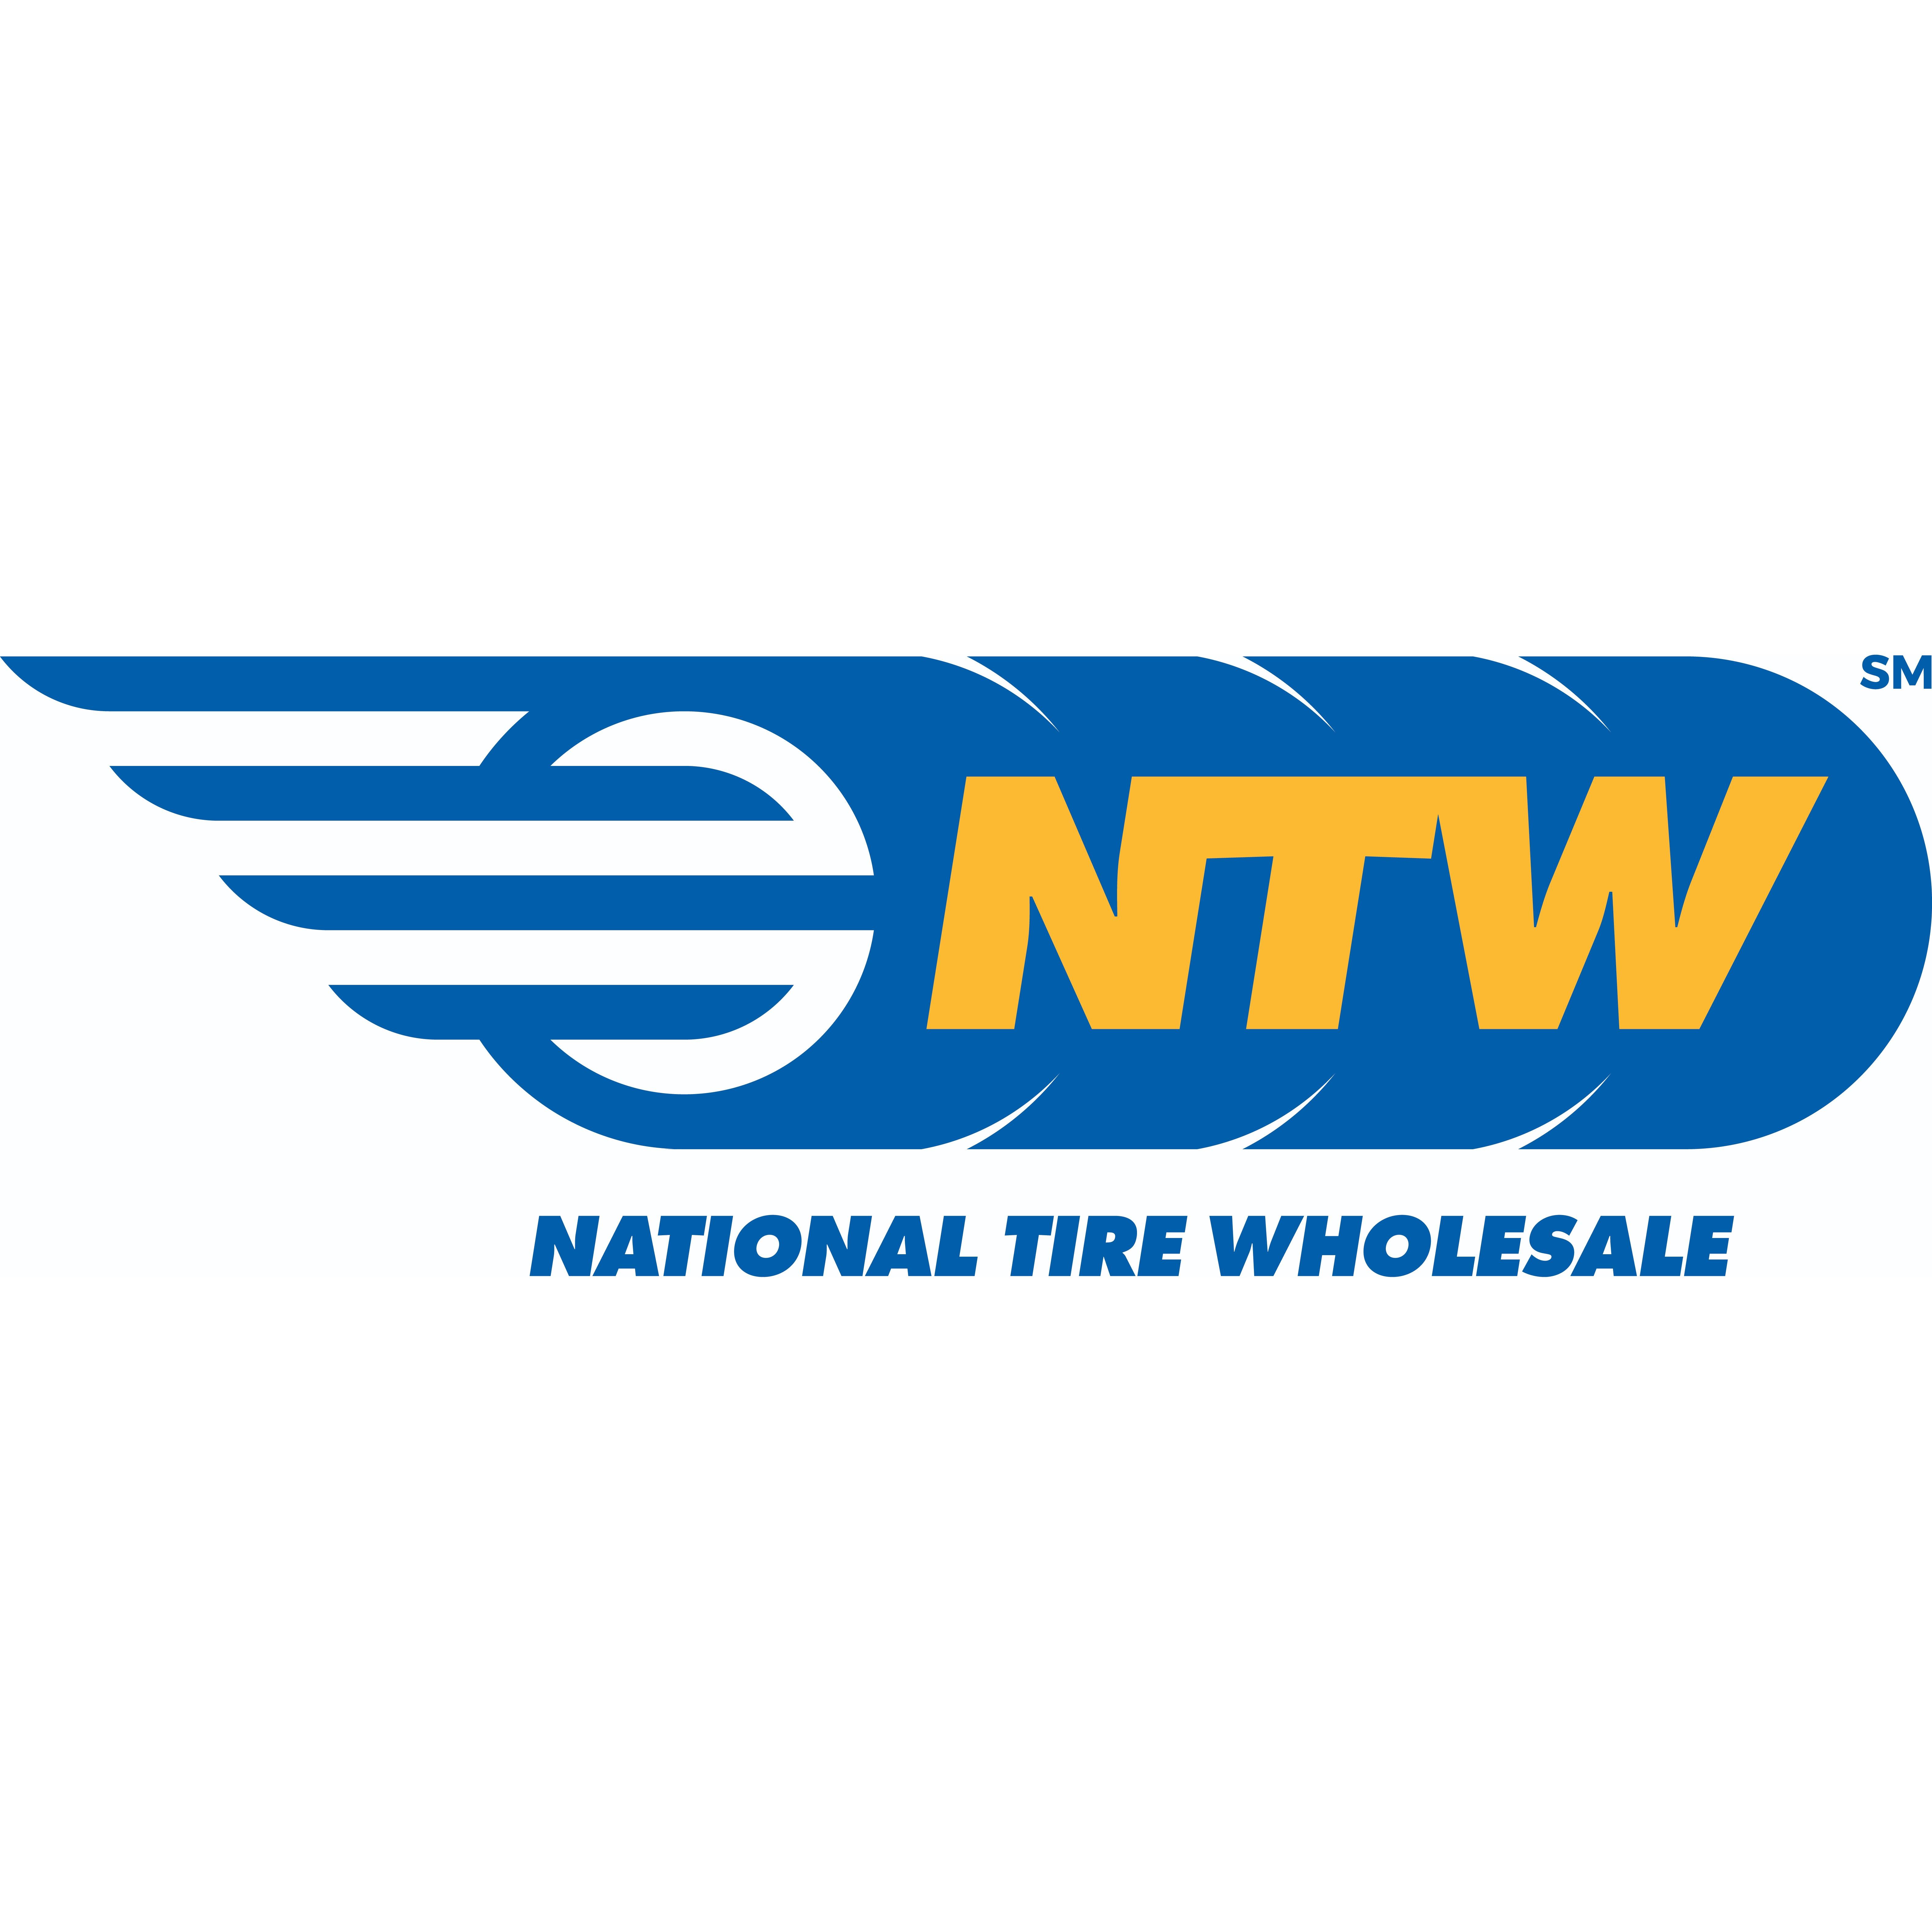 NTW - National Tire Wholesale - Closed